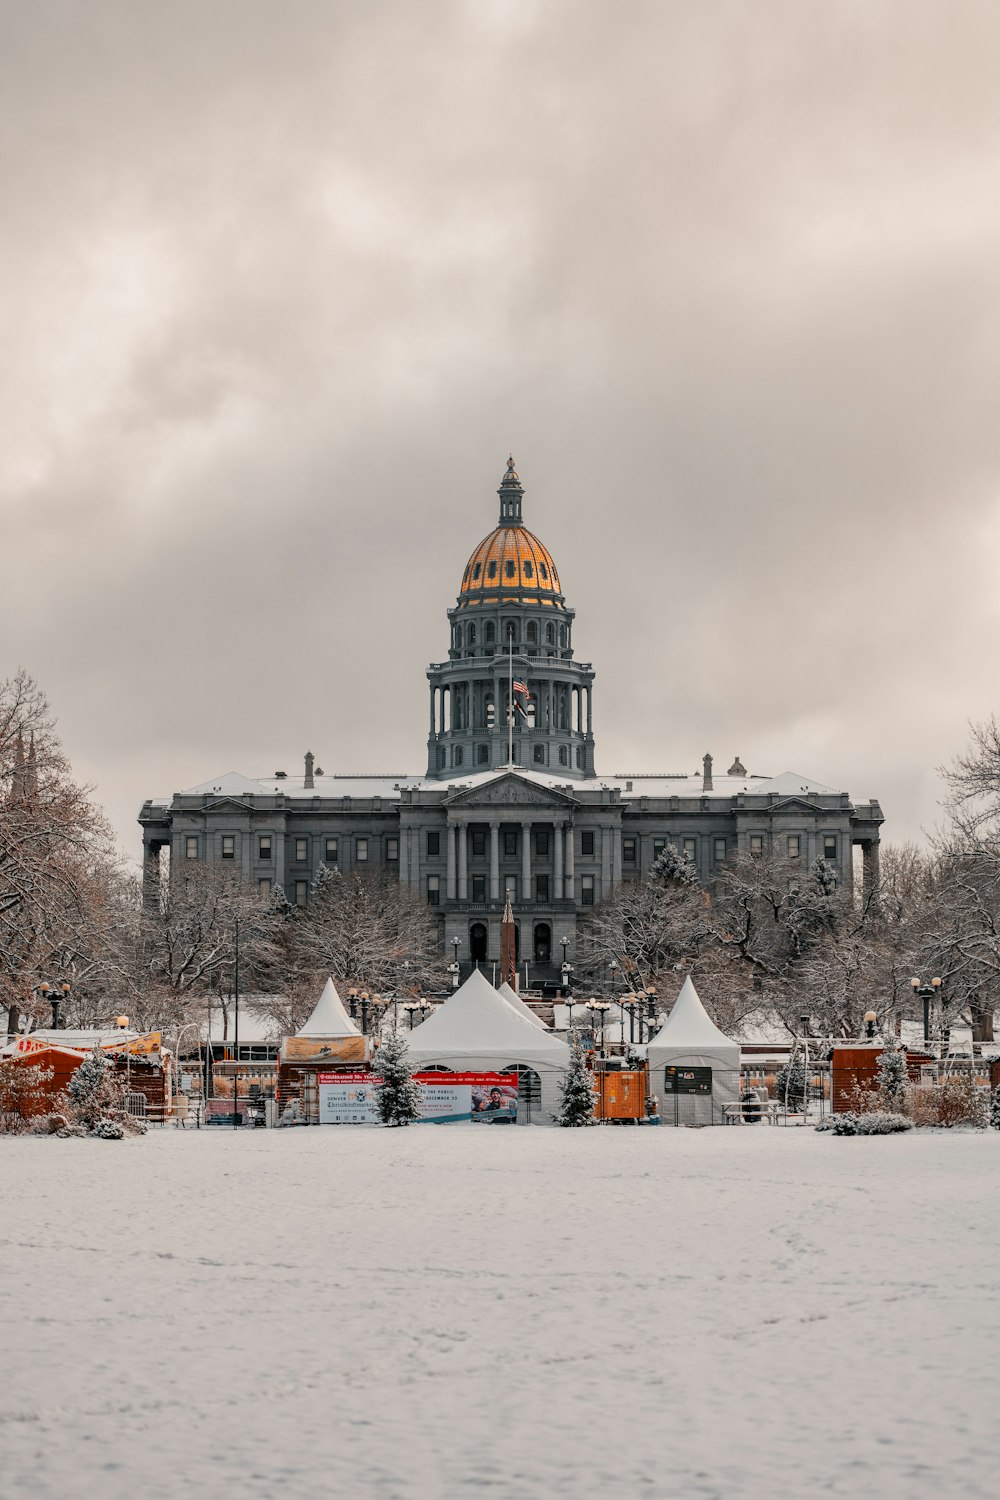 a large building with a dome in the middle of a snowy field